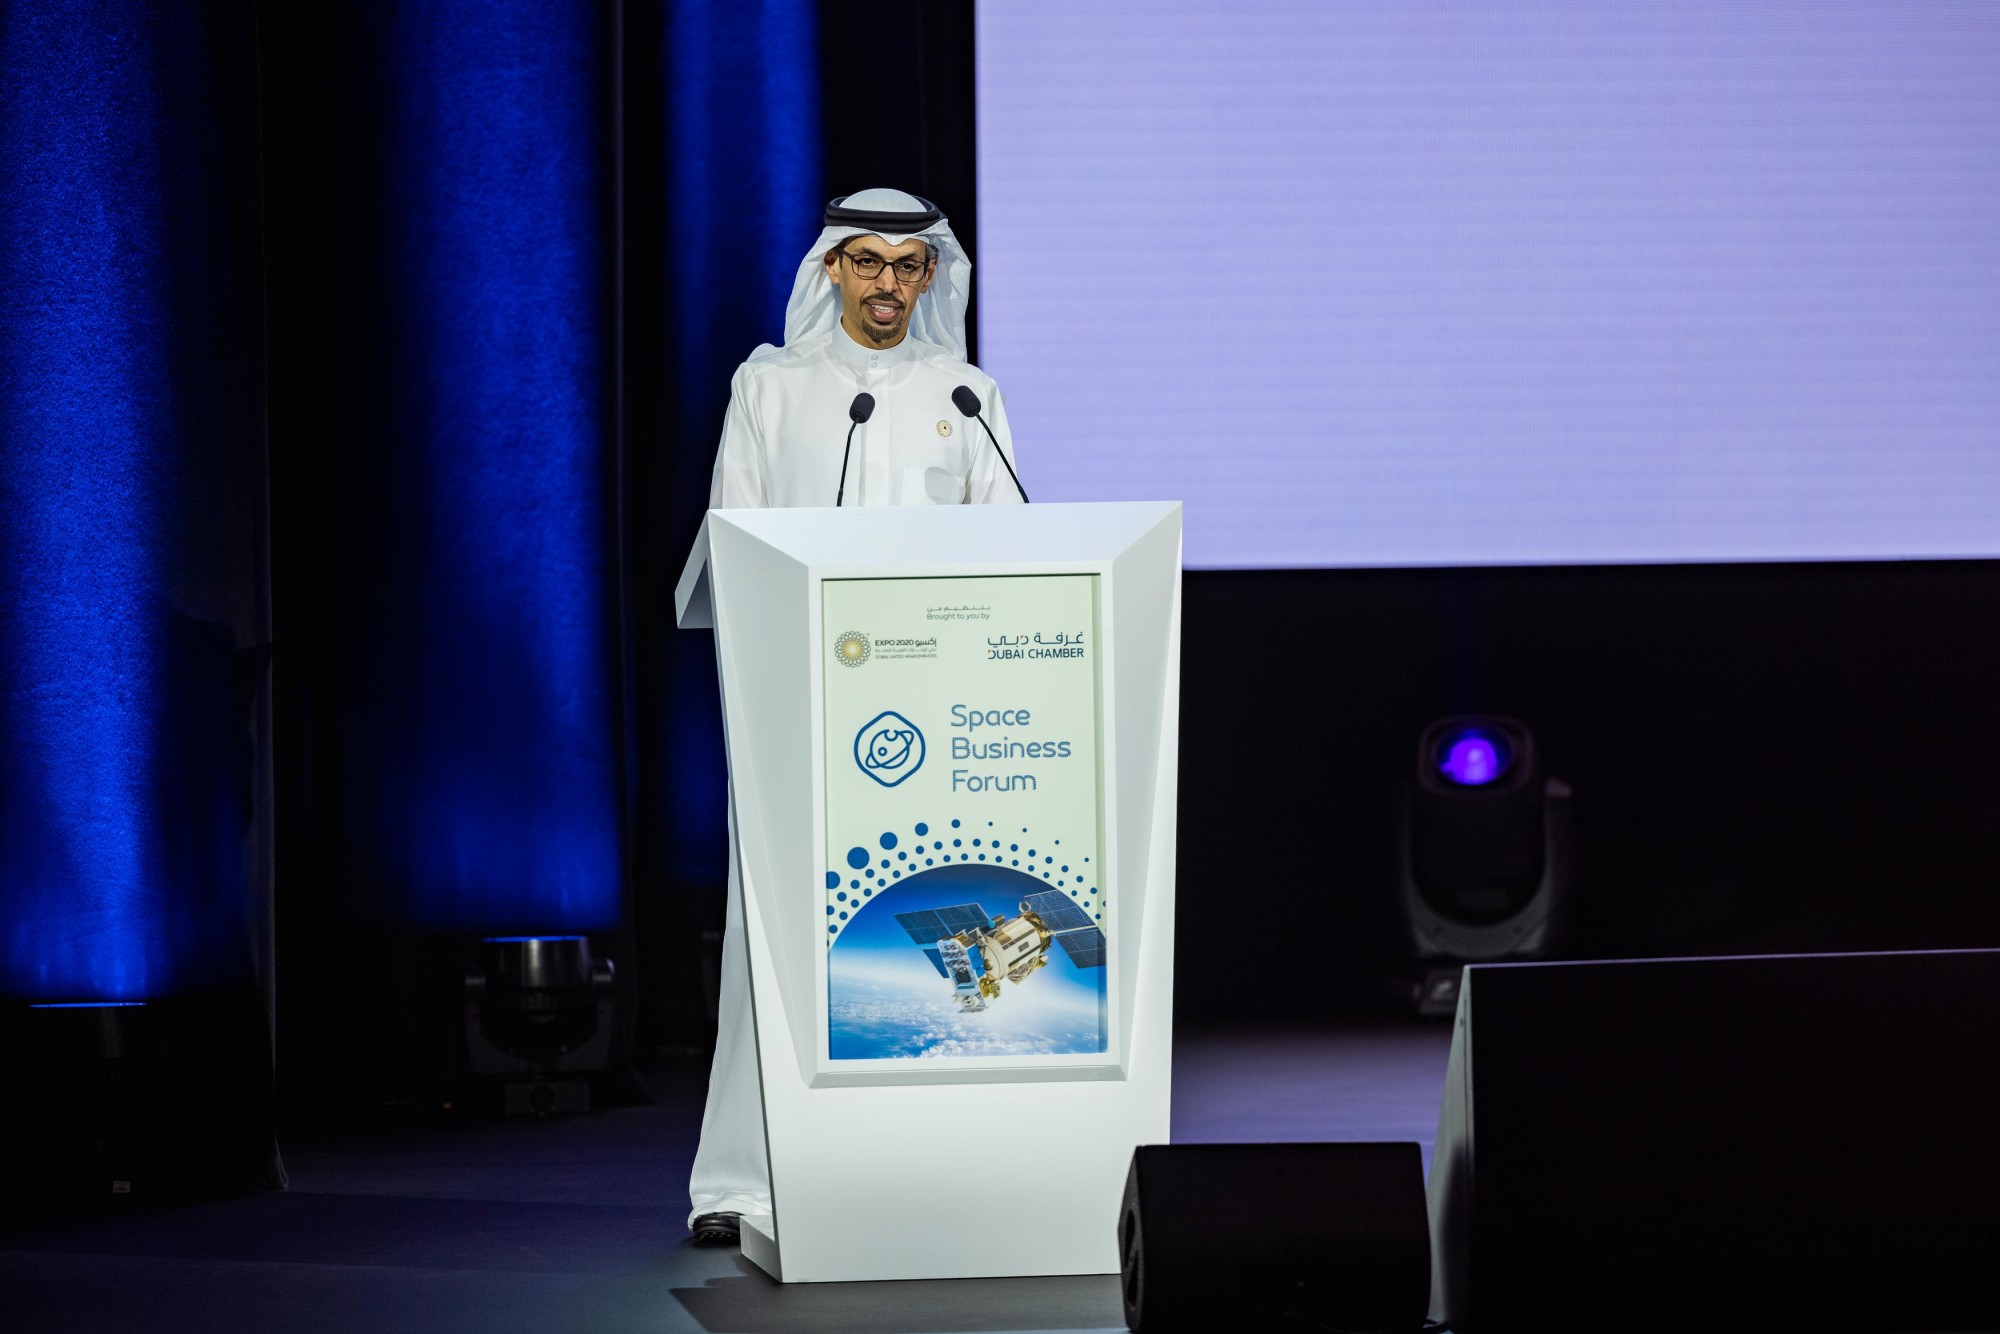 HE Hamad Buamim President &amp;andCEO Dubai Chamber of Commerce during the Space Business Forum Web Image m5158